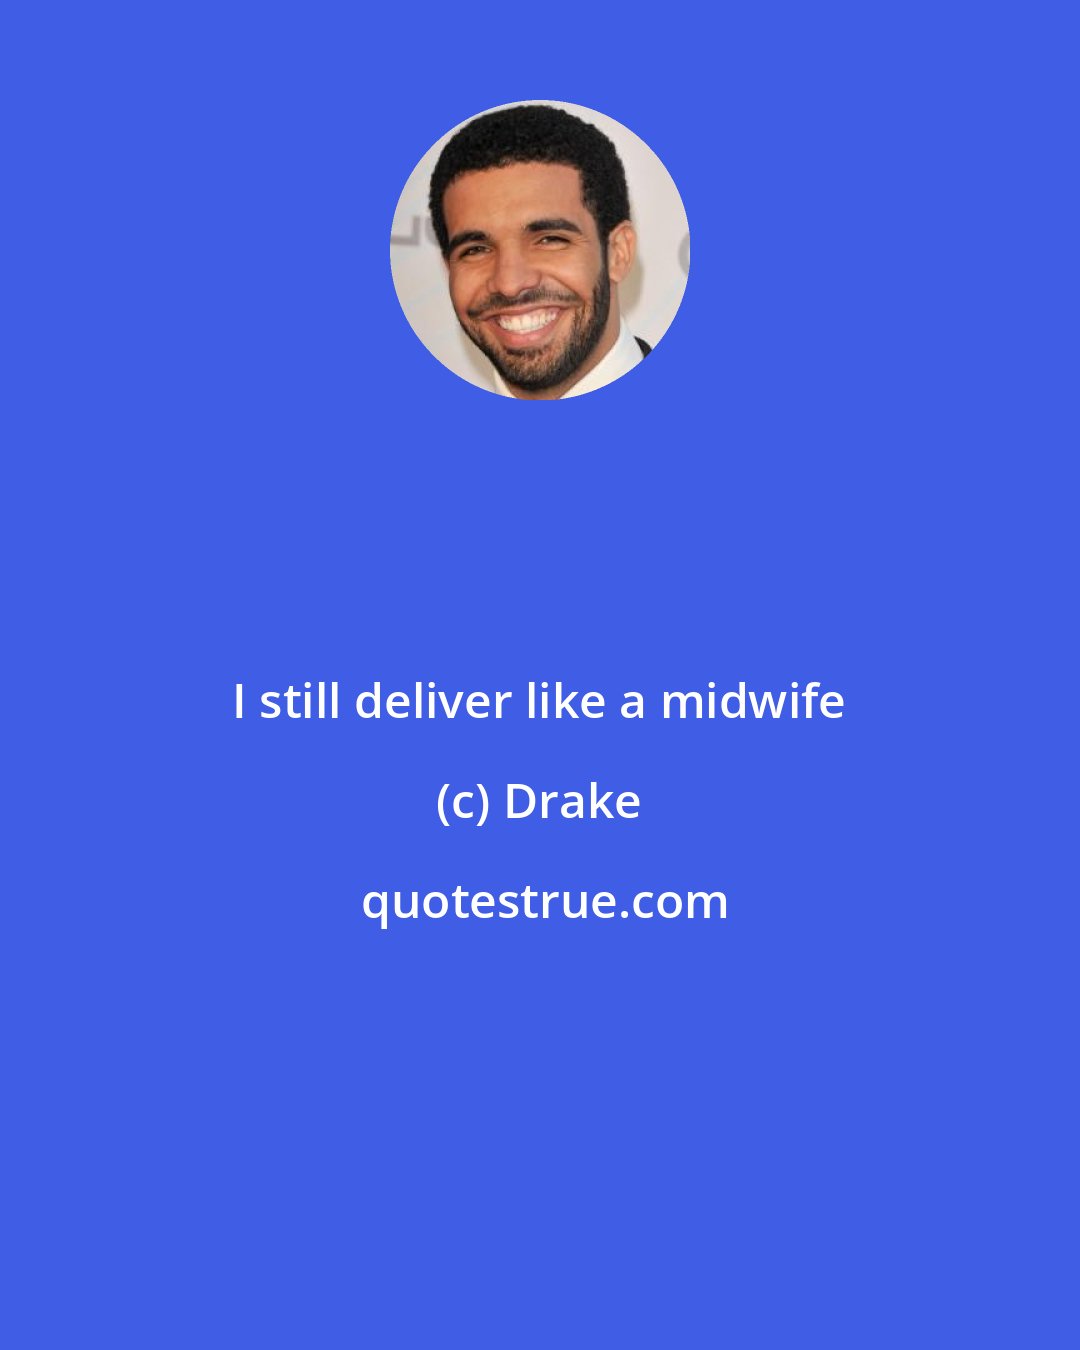 Drake: I still deliver like a midwife